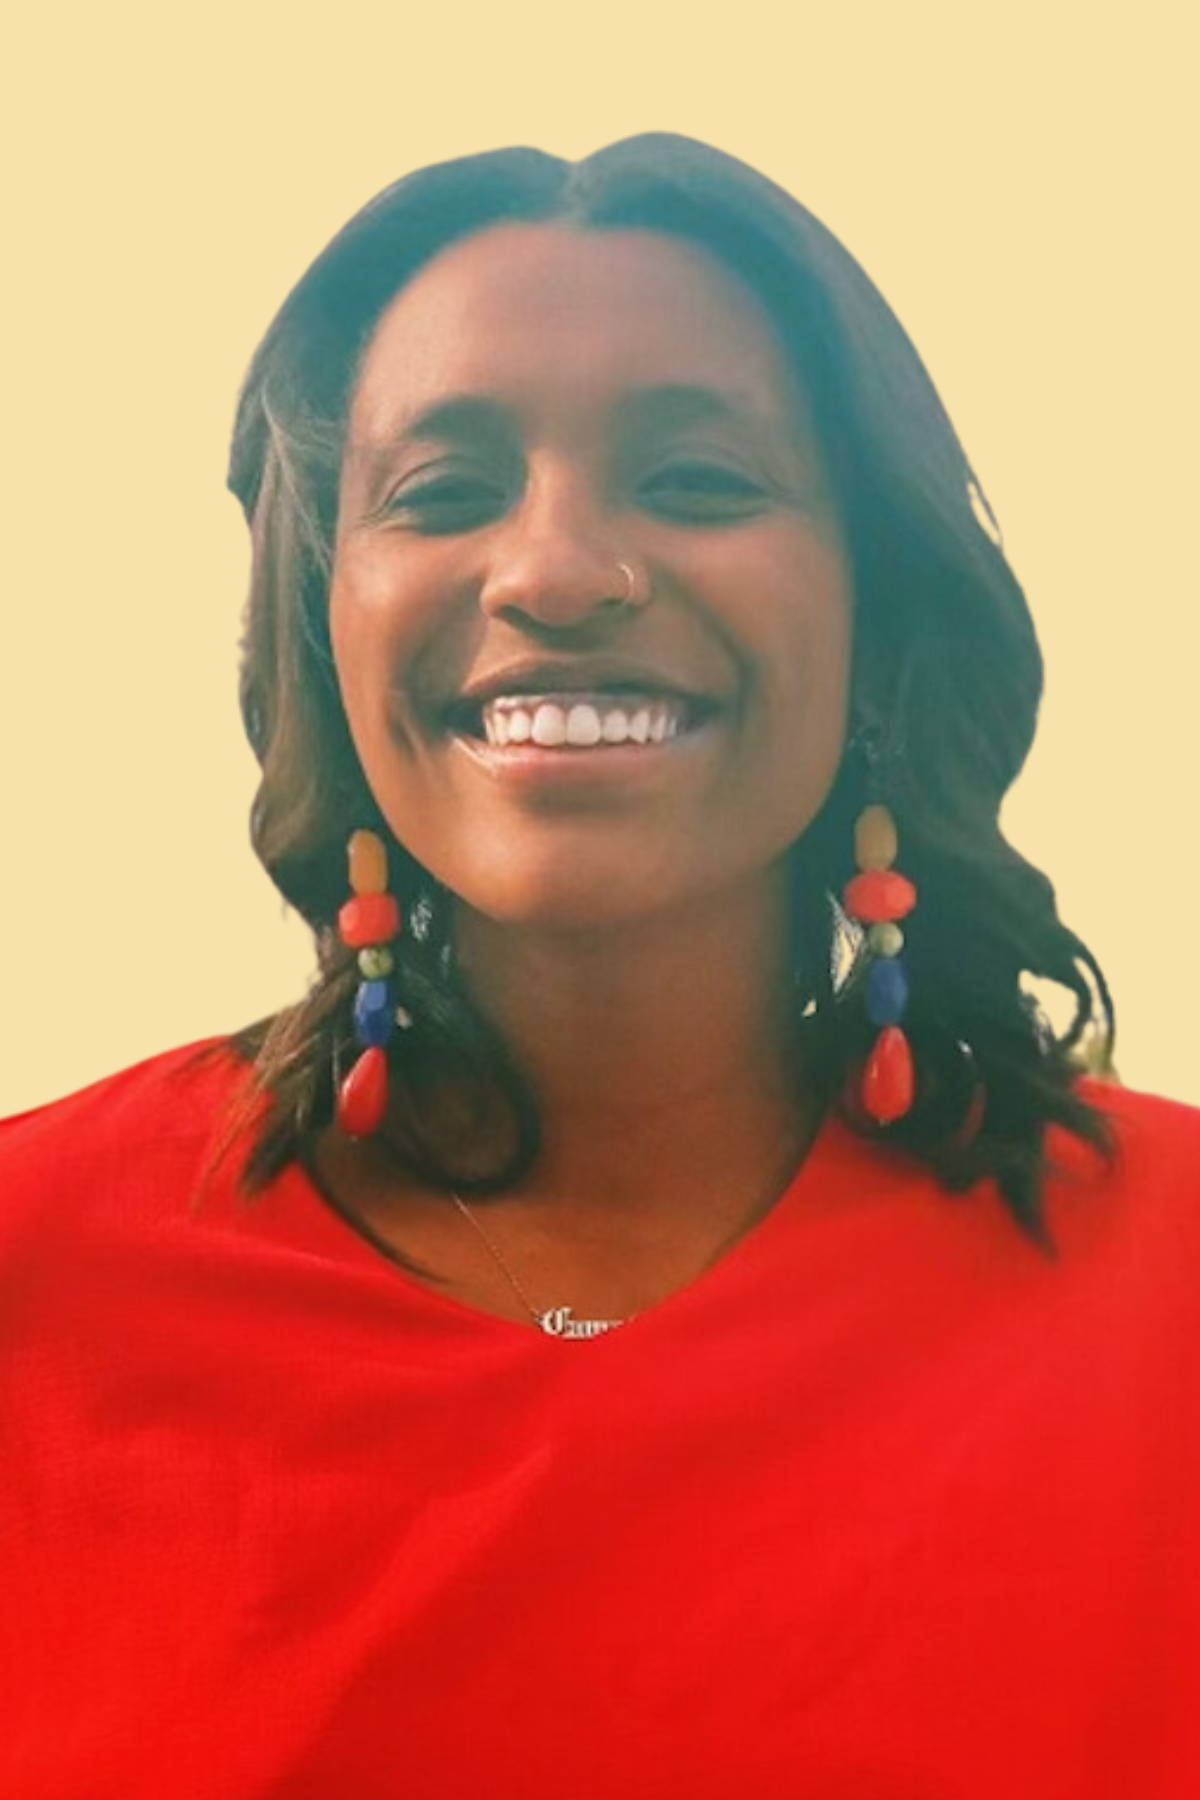 Woman wearing bright red shirt and long earrings smiling to camera